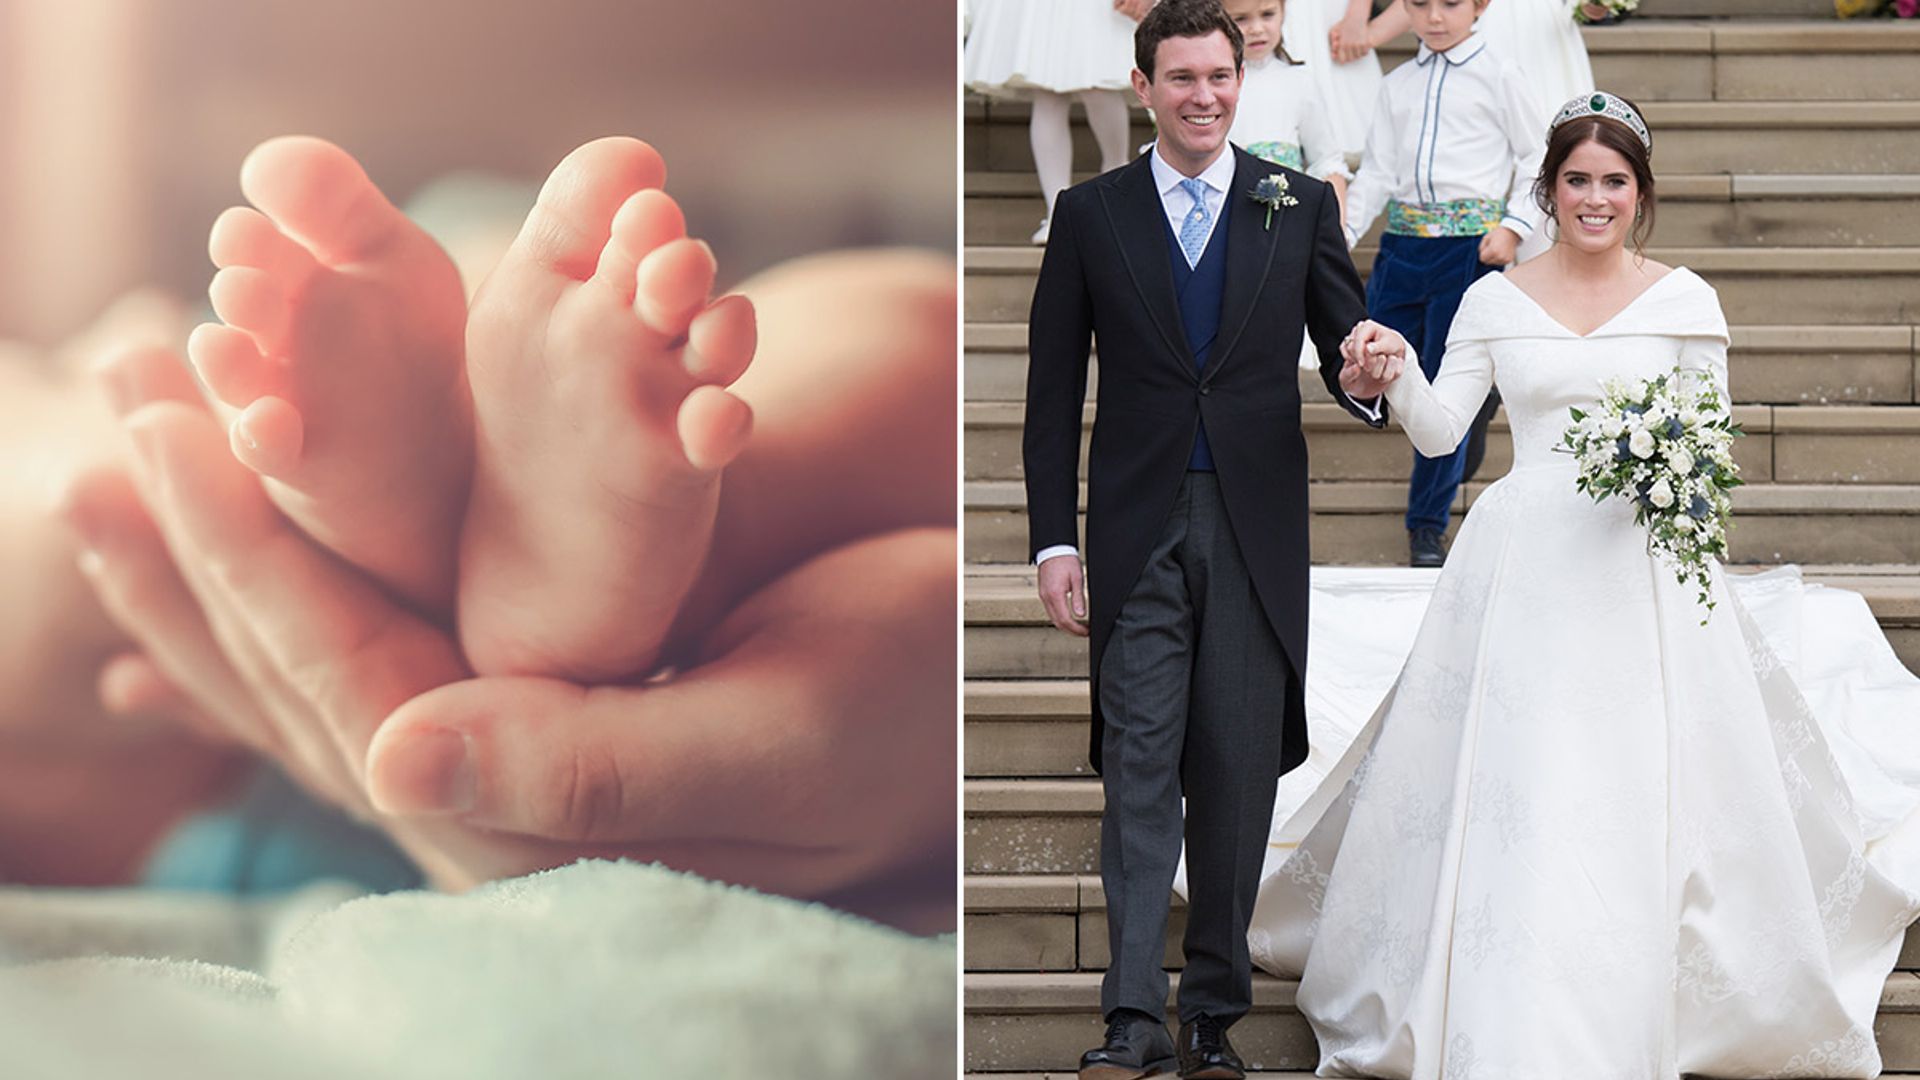 Baby name inspiration for Princess Eugenie – the most popular soap names of 2020